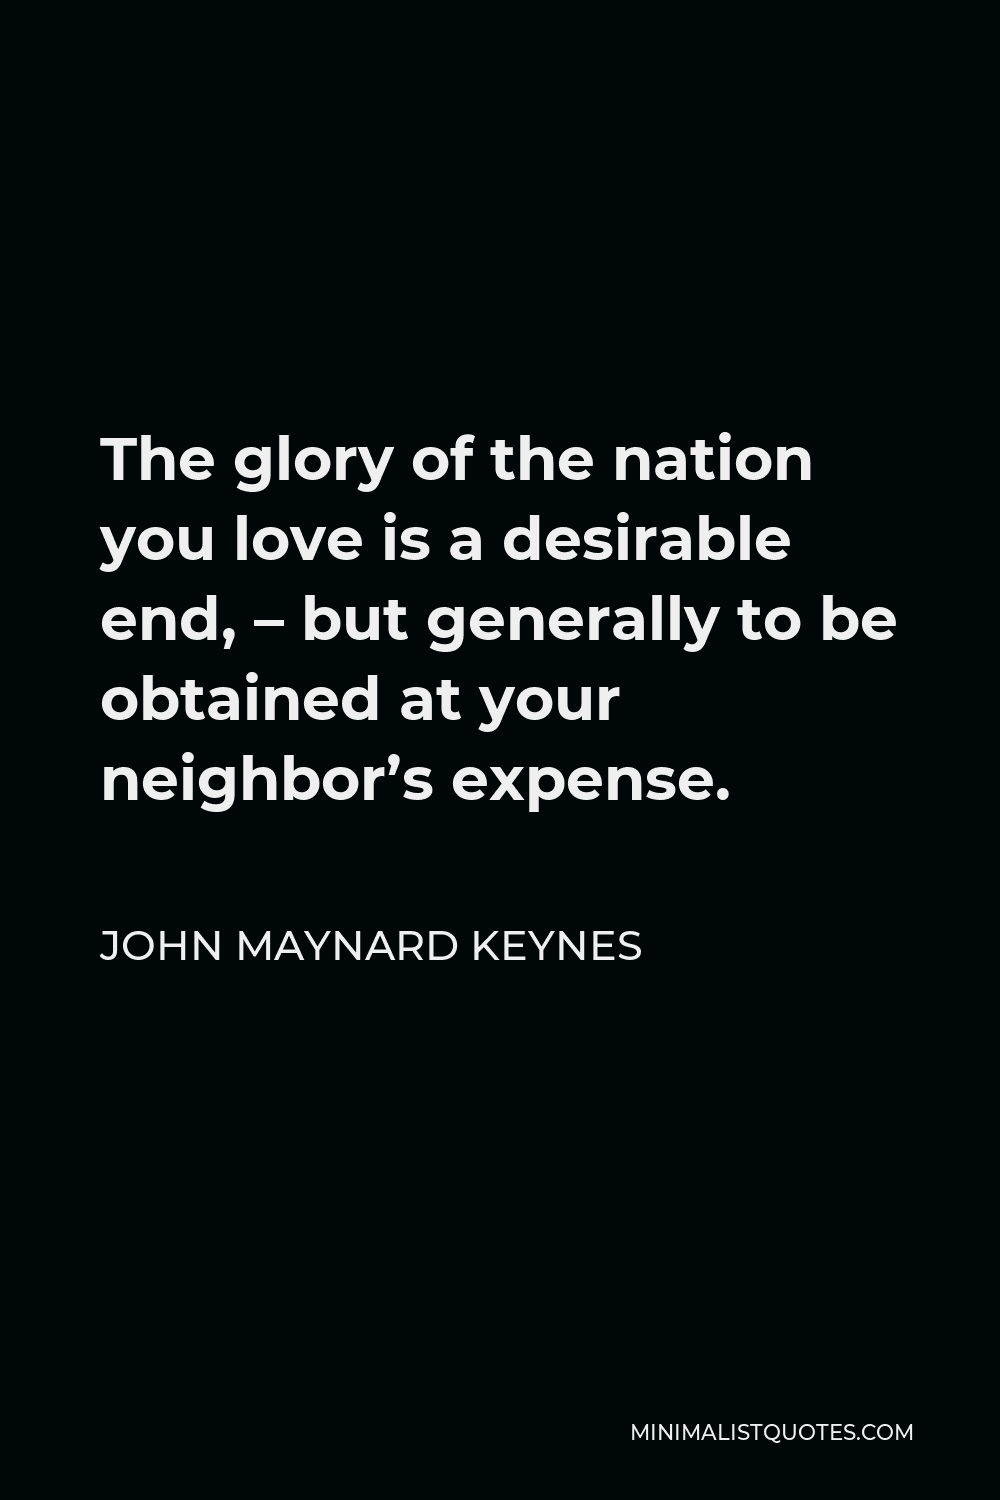 John Maynard Keynes Quote - The glory of the nation you love is a desirable end, – but generally to be obtained at your neighbor’s expense.